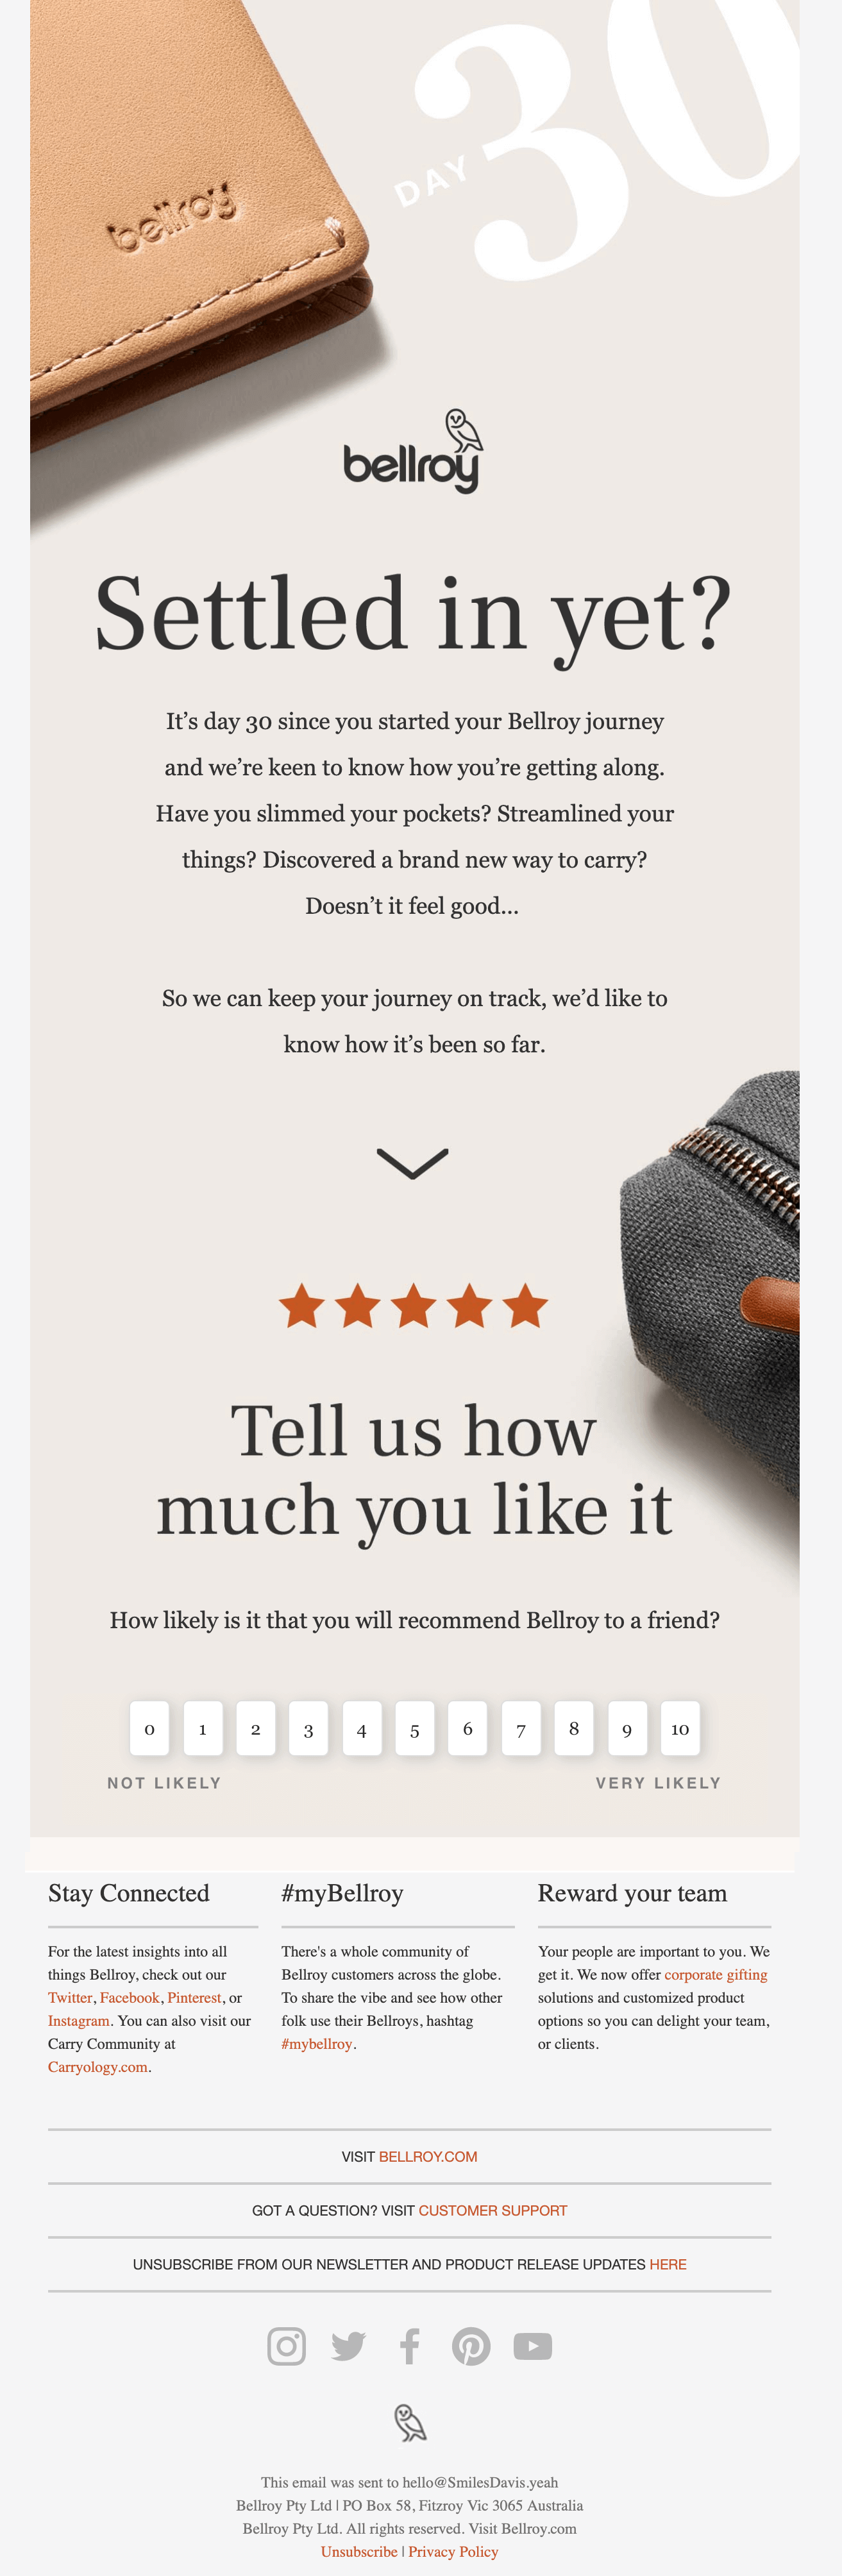 Post-purchase email from Bellroy